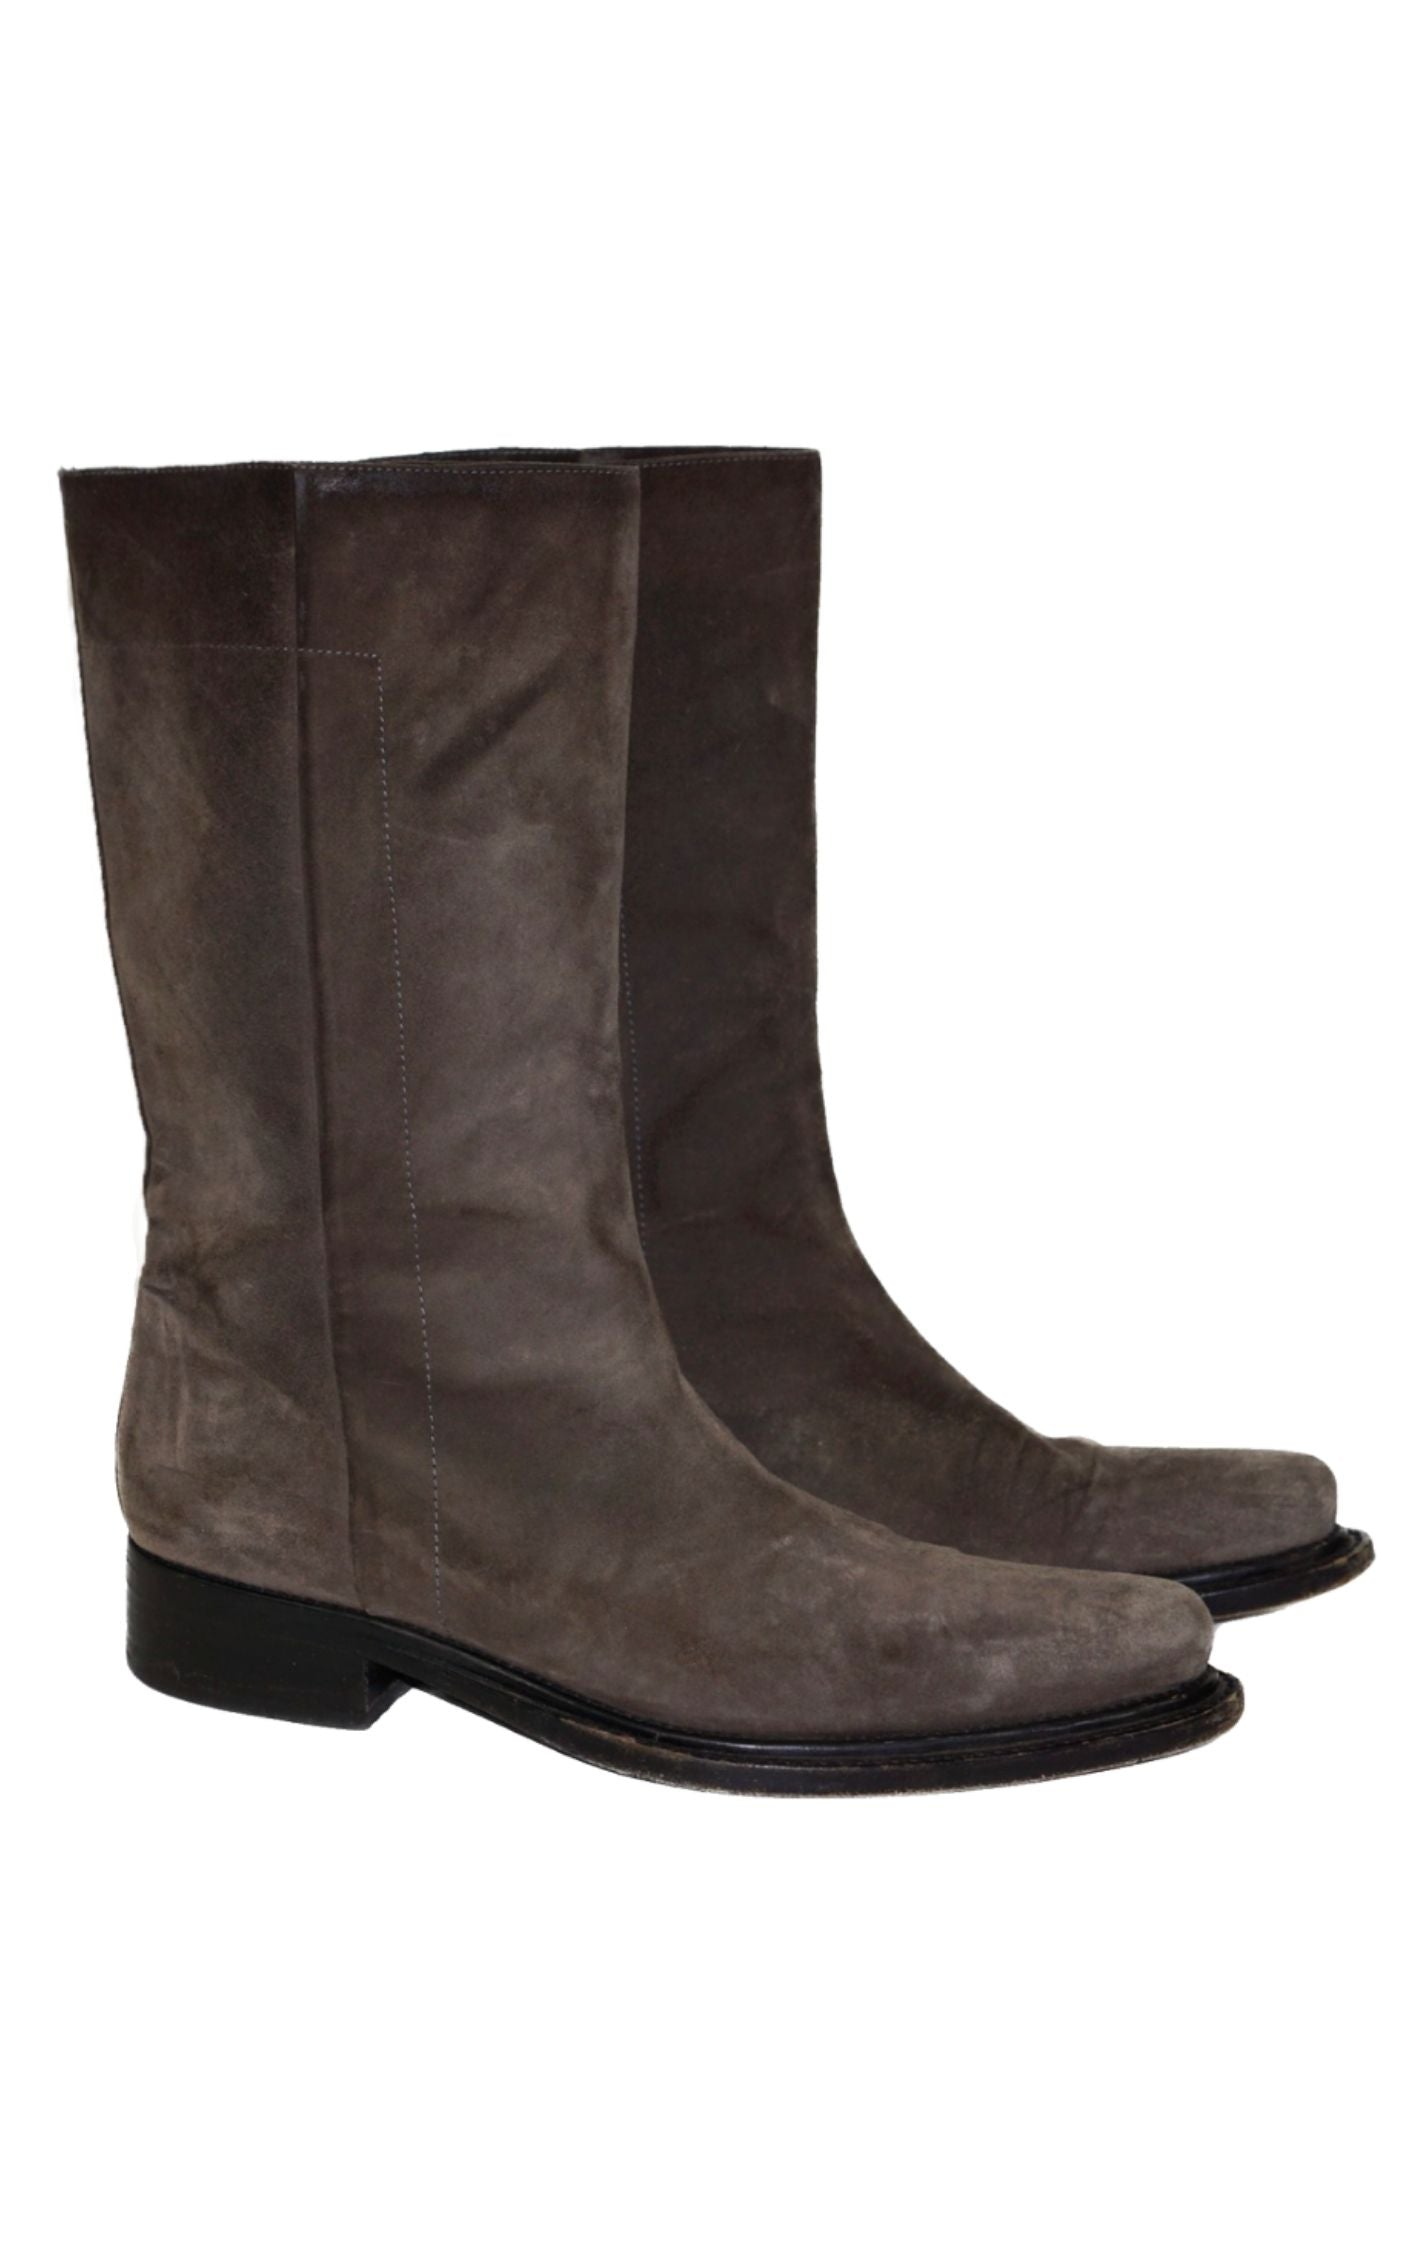 PRADA Gray Suede Leather Mid Calf Boots RESELLUM